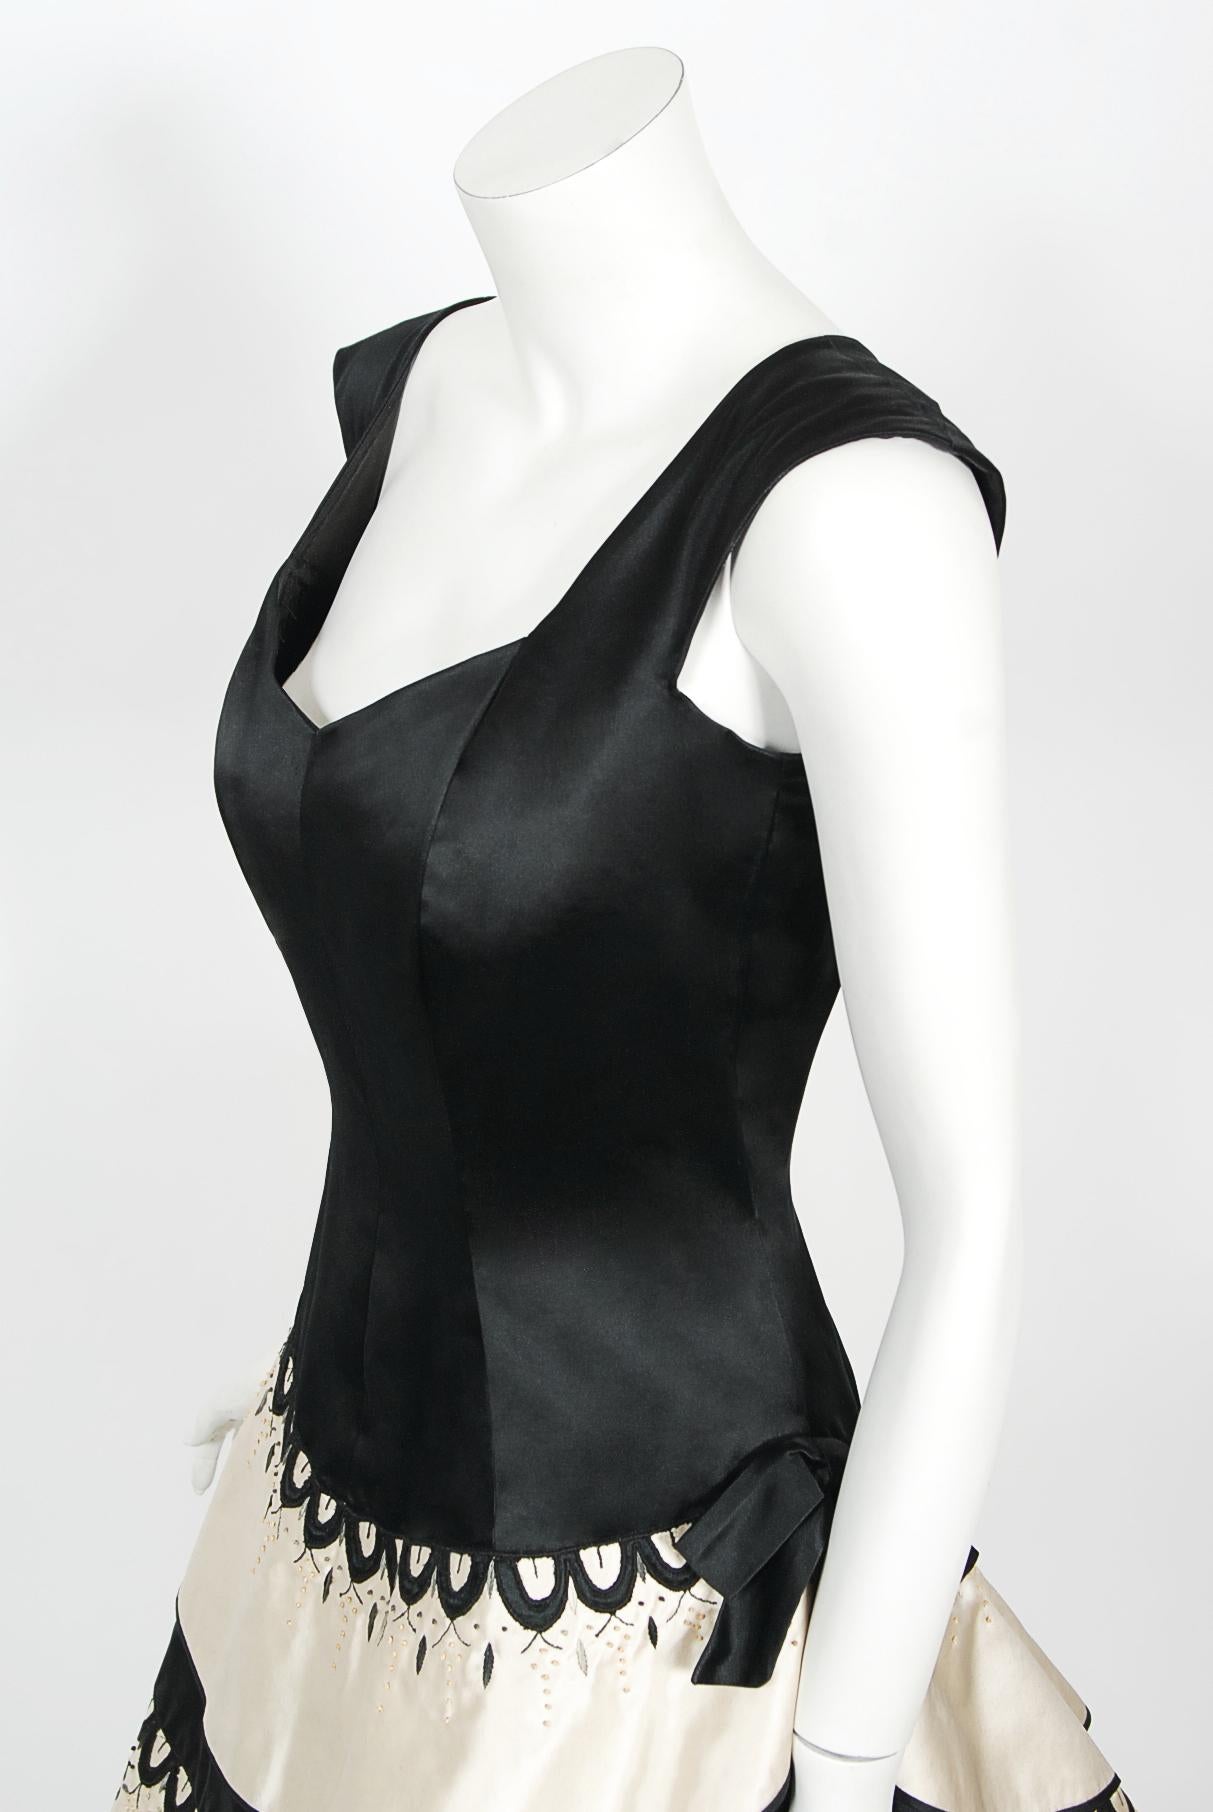 Vintage 1950's Emilio Schuberth Couture Black & Ivory Embroidered Satin Dress For Sale 5